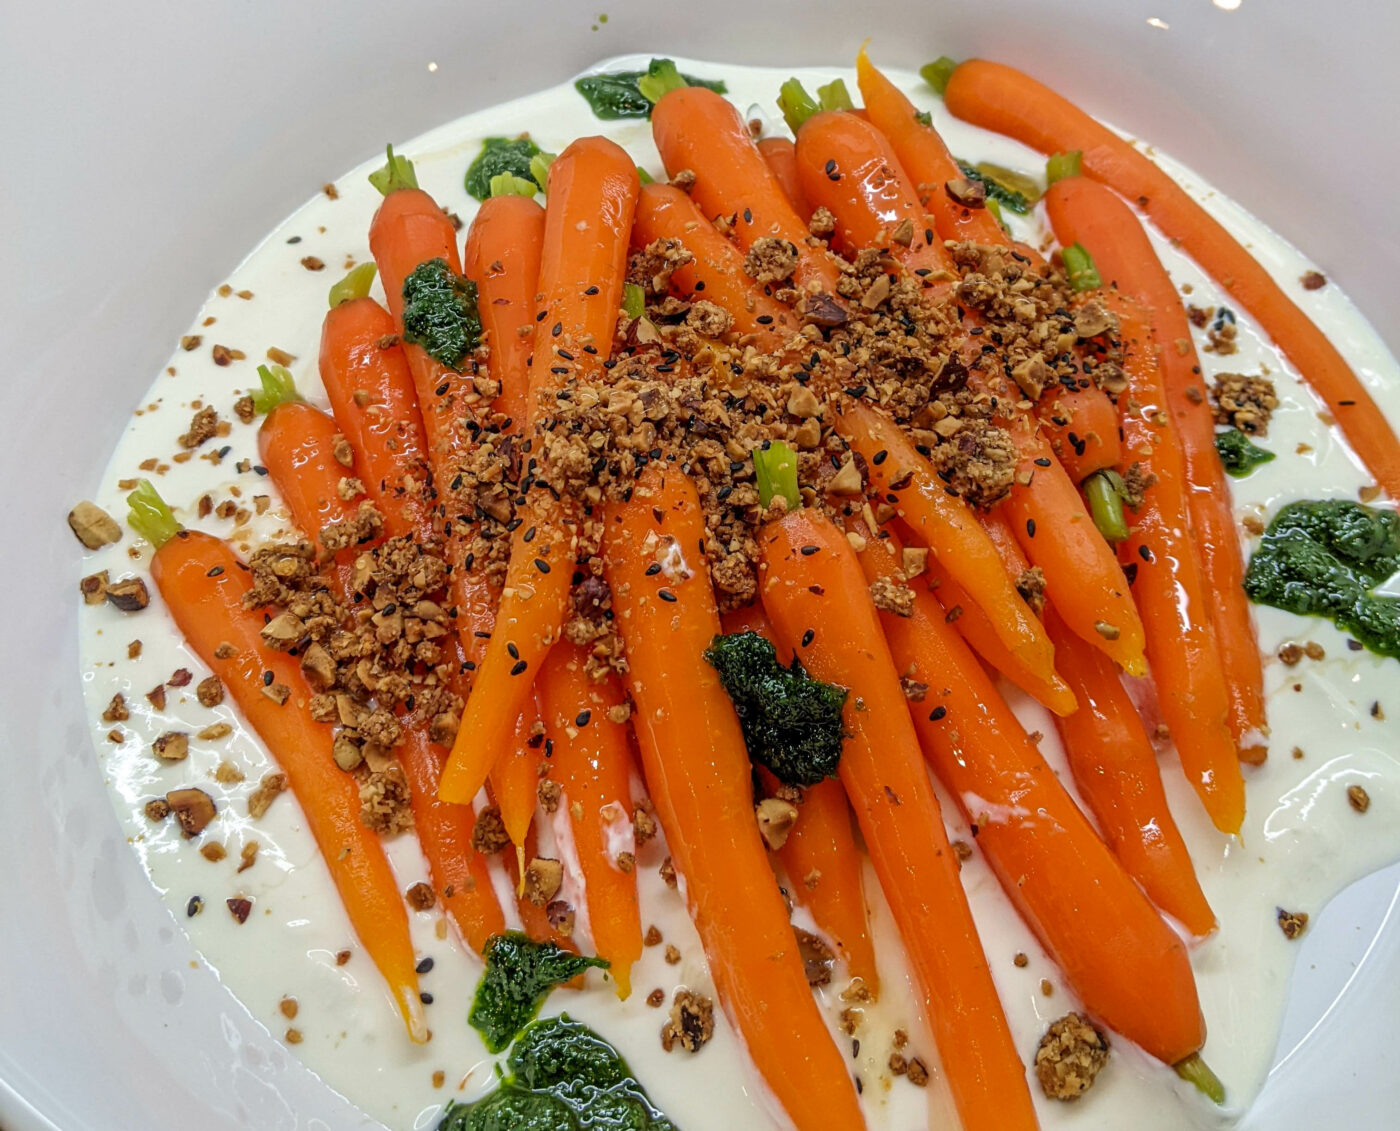 Carrots with nut crumble, dill oil and yoghurt